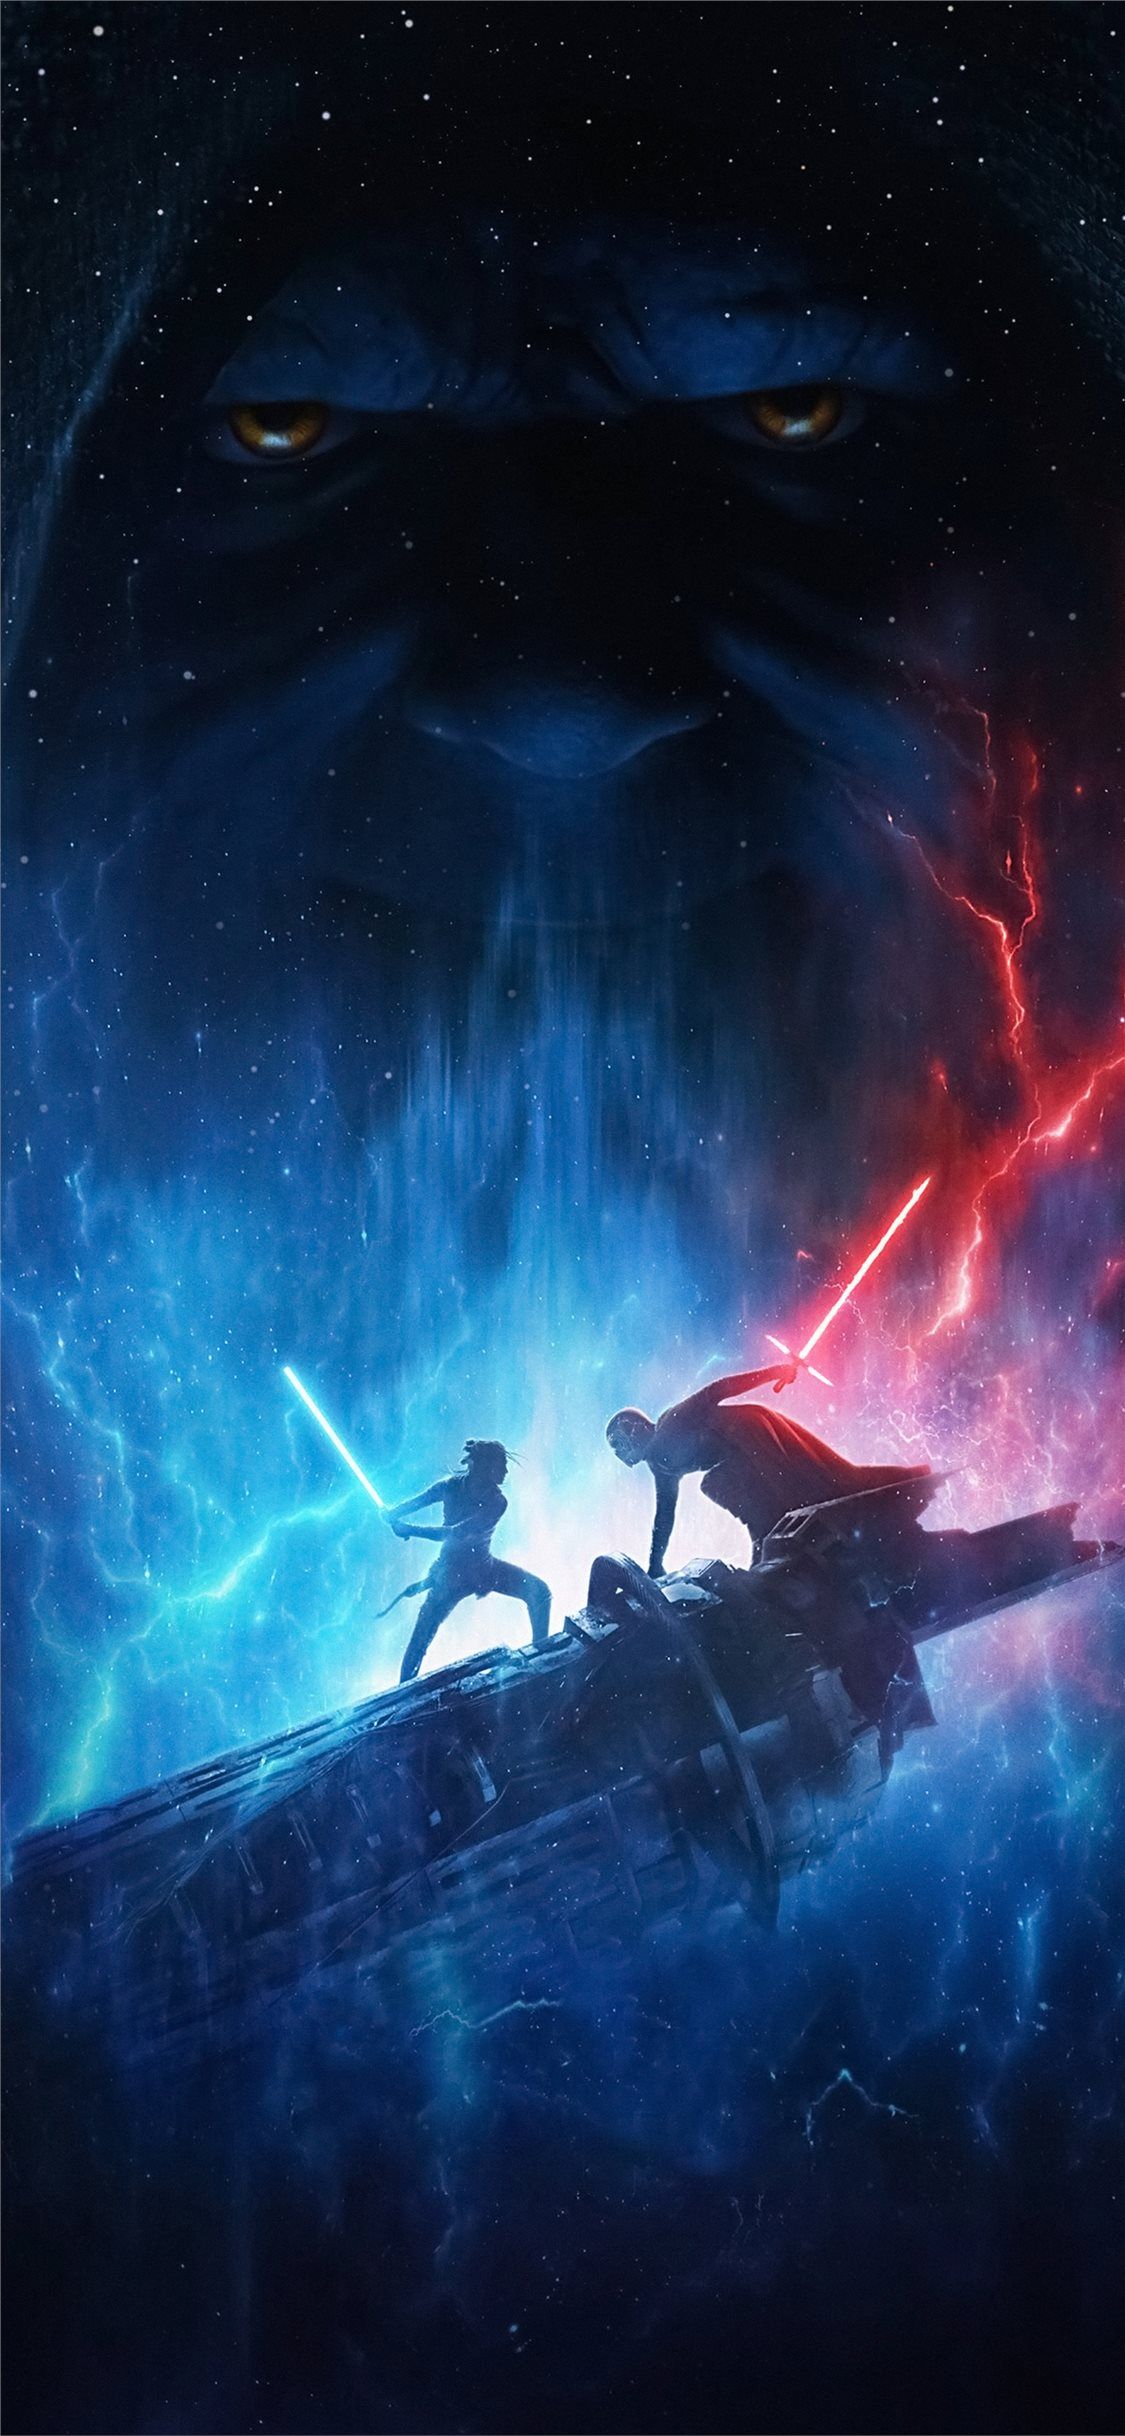 Awesome Star Wars iPhone Wallpaper Free Awesome Star Wars iPhone Background